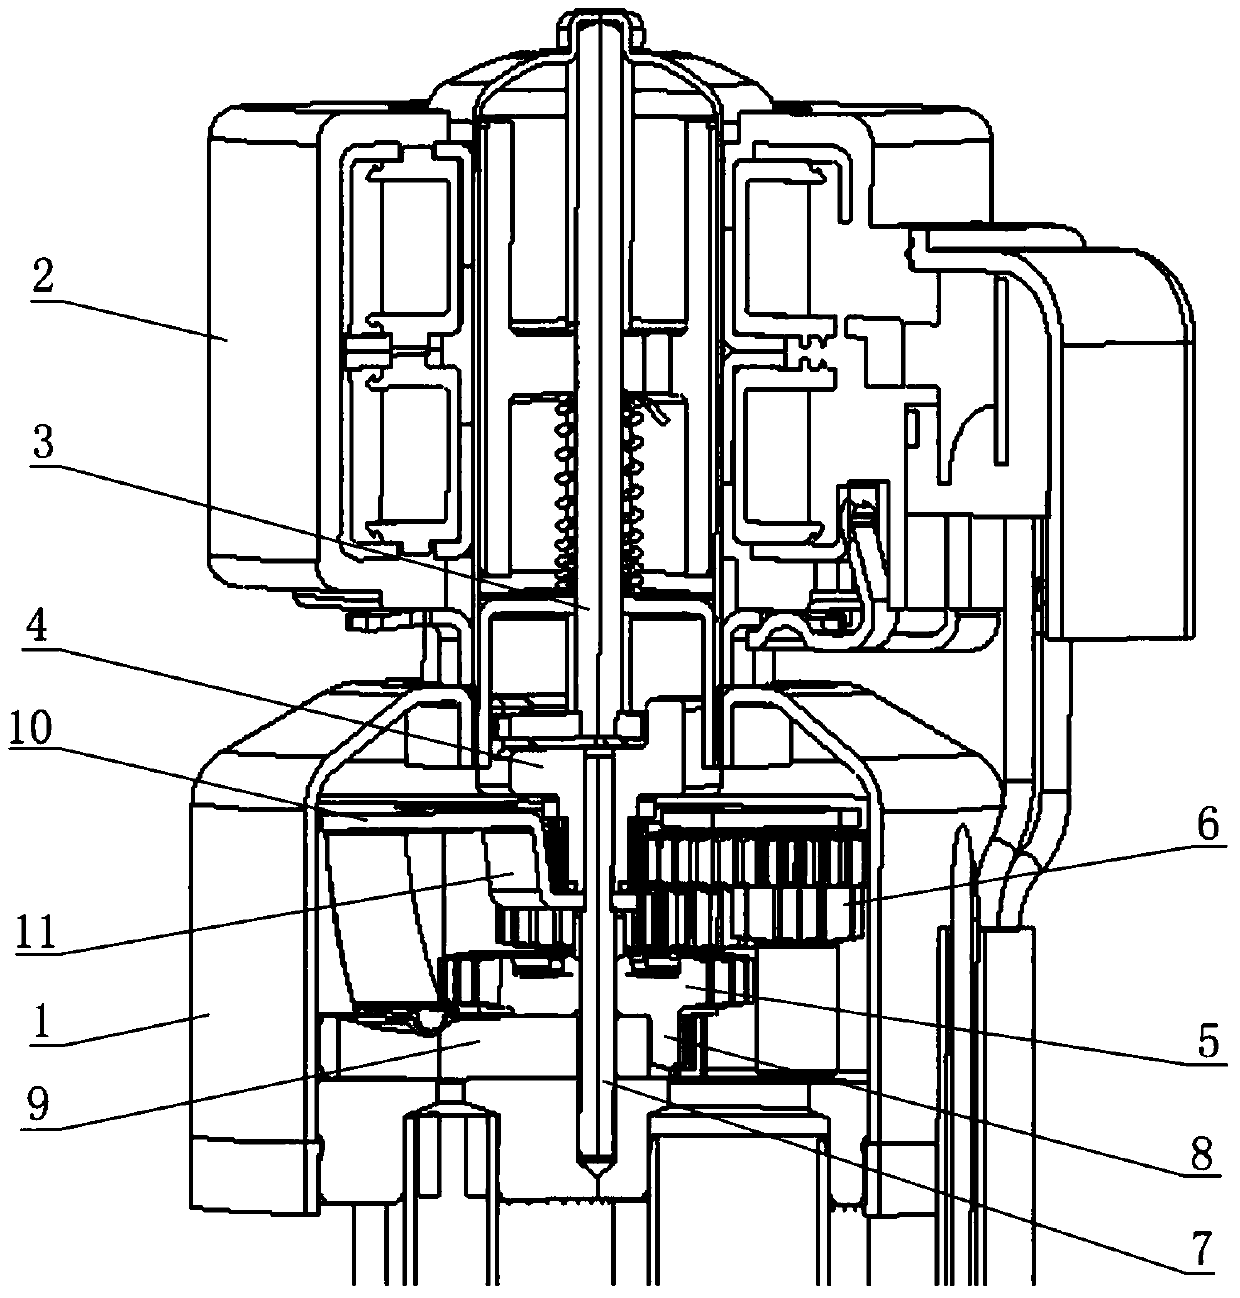 An electric three-way valve and refrigeration equipment